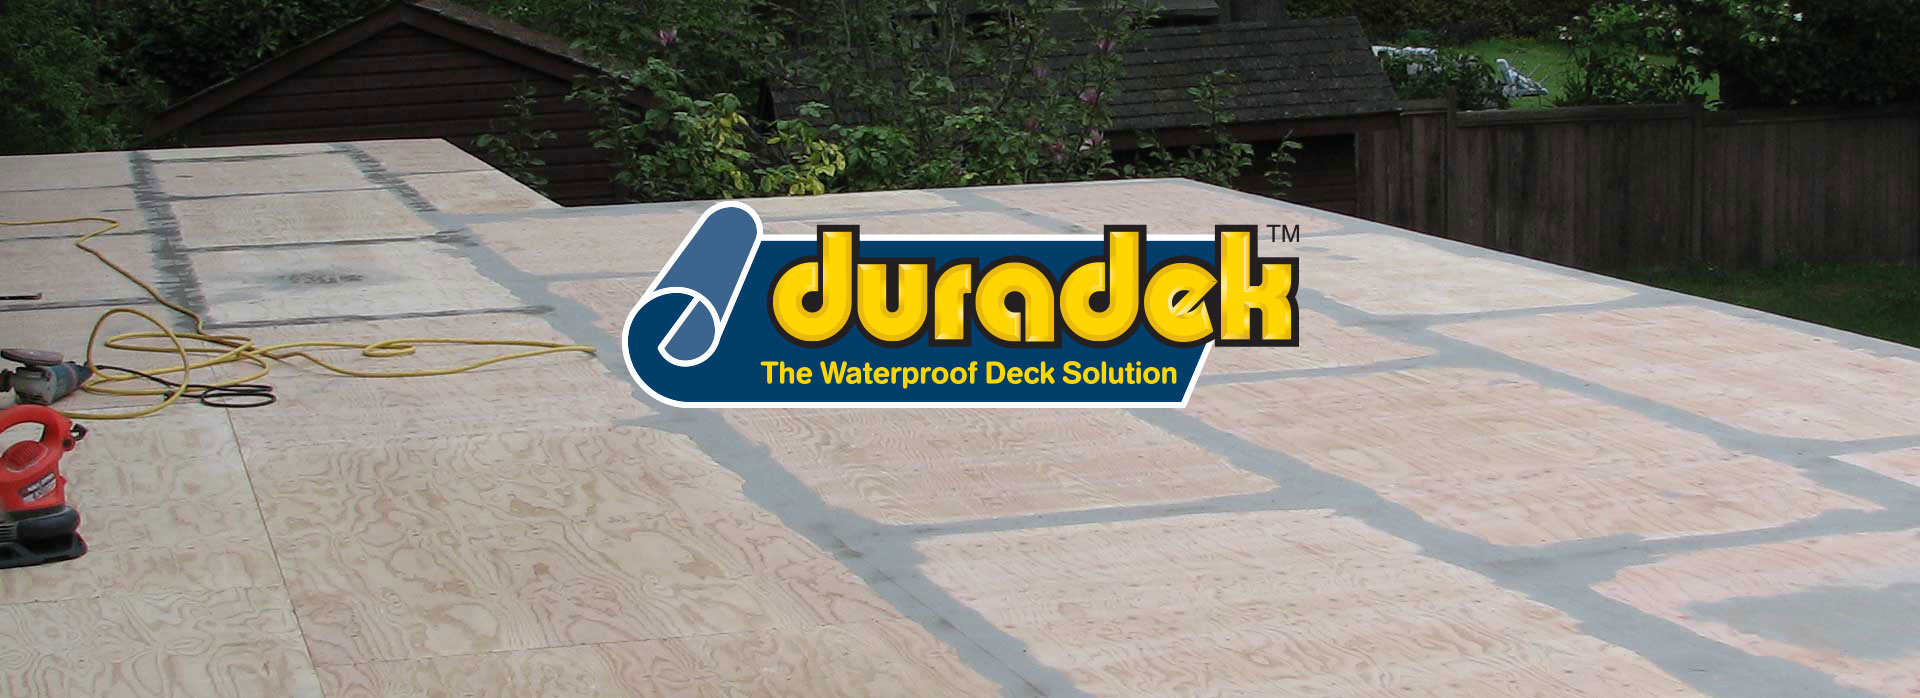 Duradek Substrate and Edge Trims Background